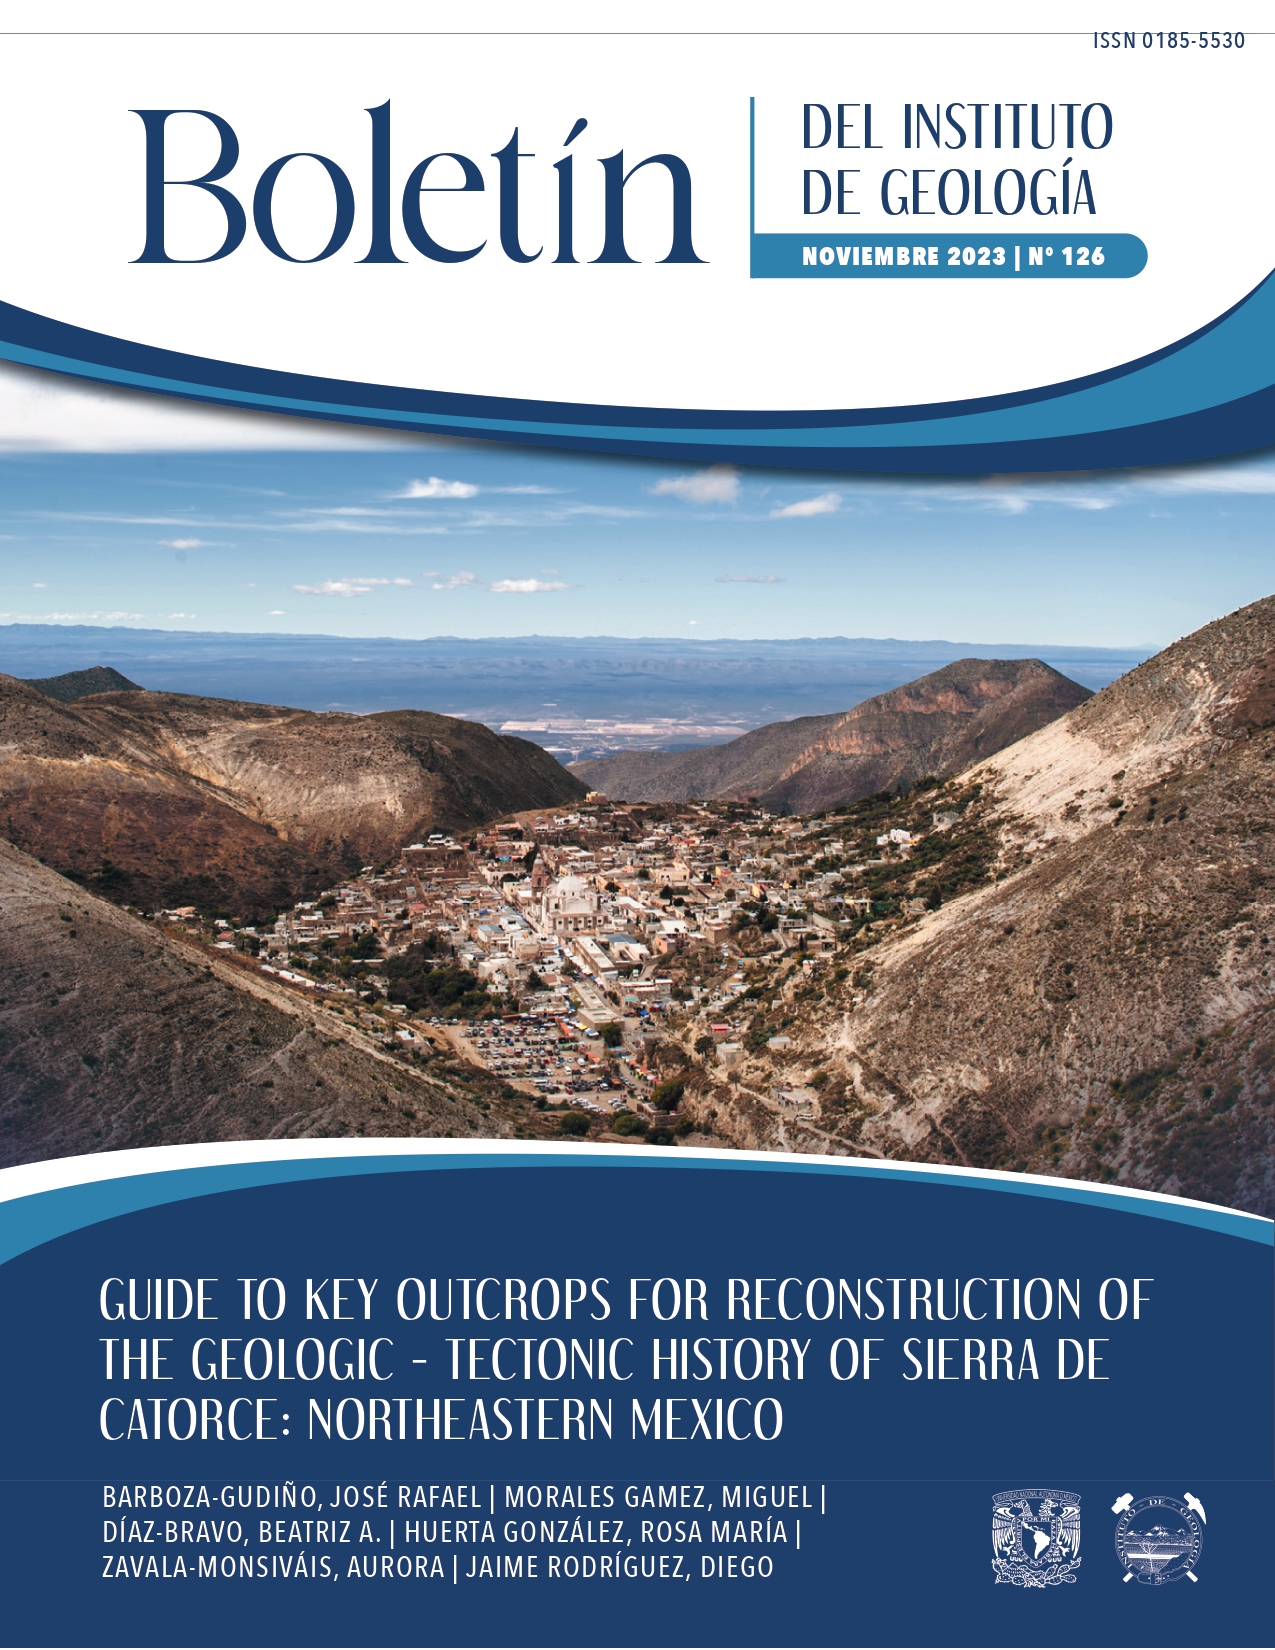 					Ver Núm. 126 (2023): Guide to Key Outcrops for Reconstruction of the Geologic-Tectonic  History of Sierra de Catorce: Northeastern Mexico
				